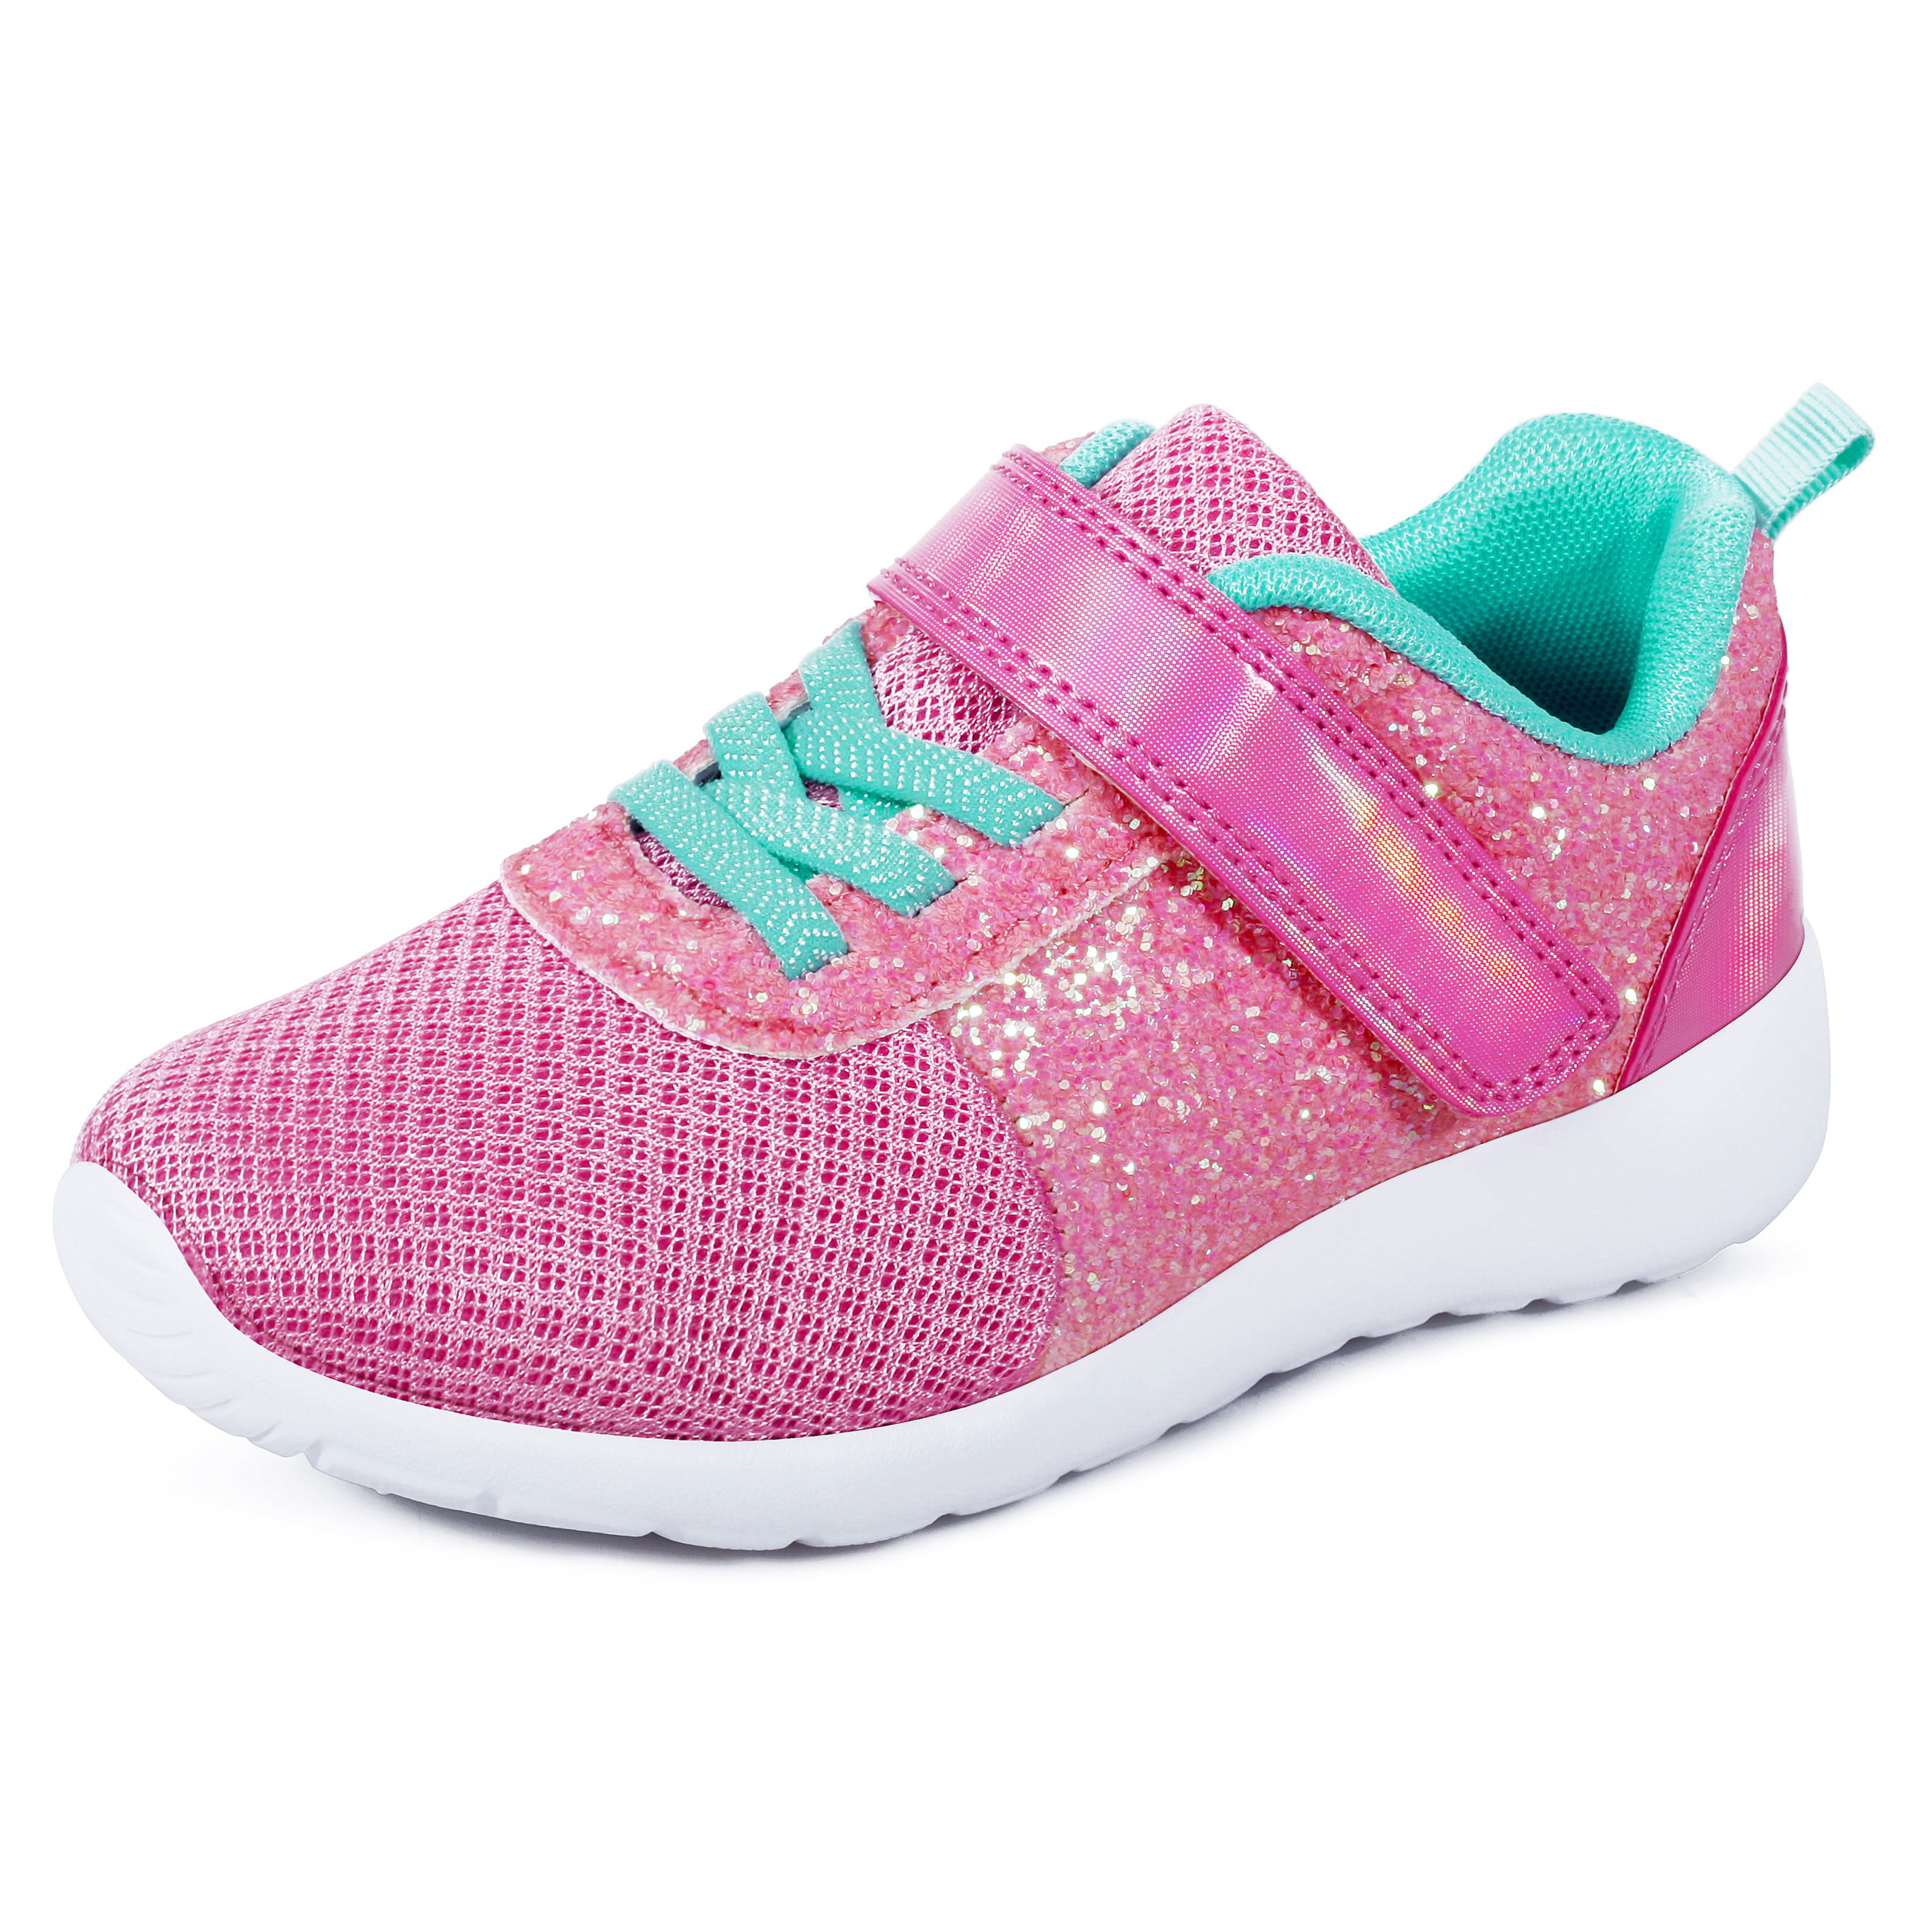 YNIQUE Kids Shoes Casual Tennis Running Sneakers for Boys Girls Toddlers